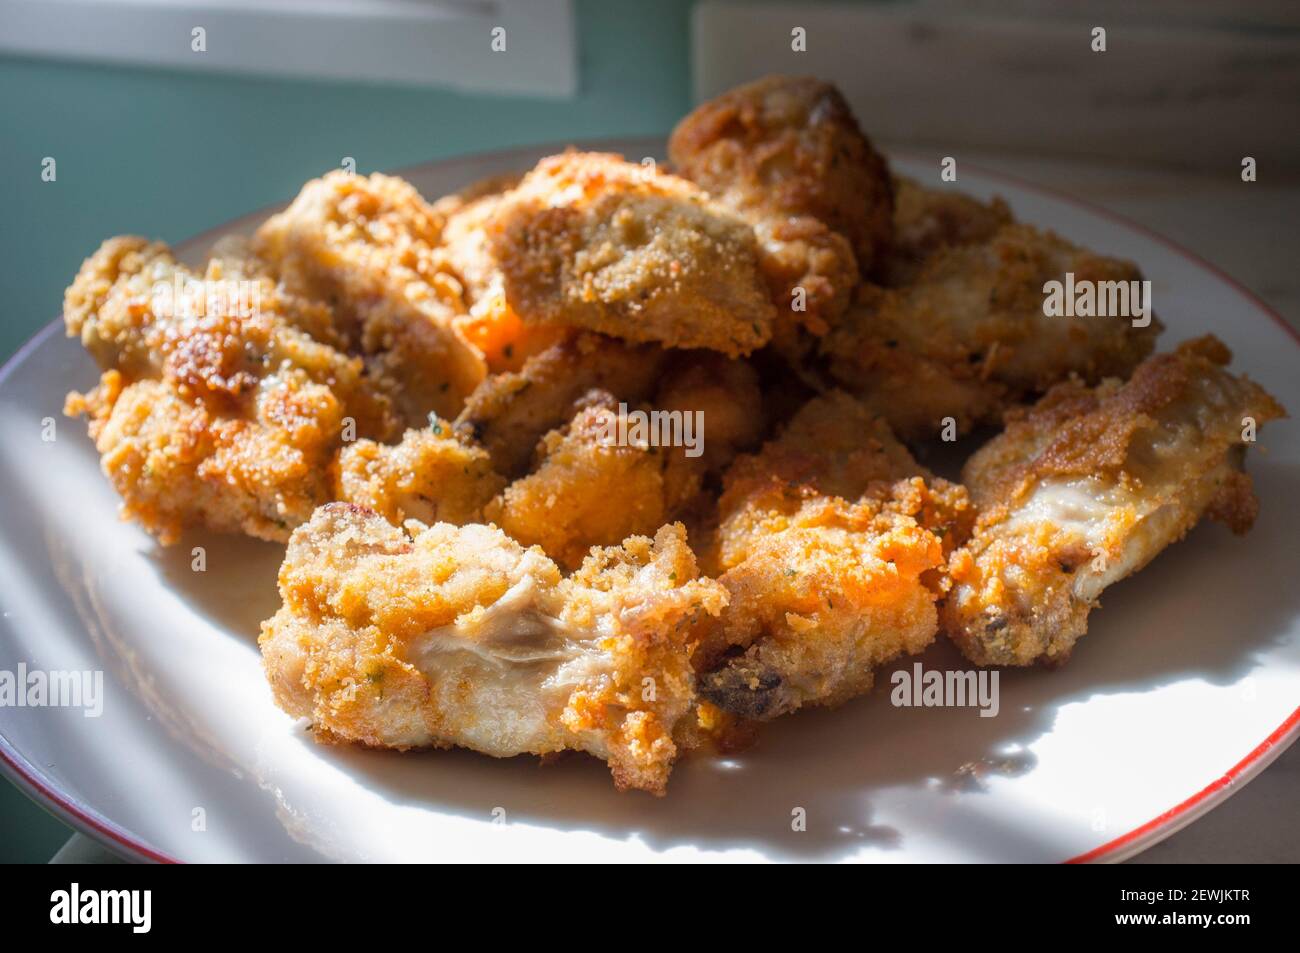 Fried bread covered chicken wings. Selective focus. Stock Photo